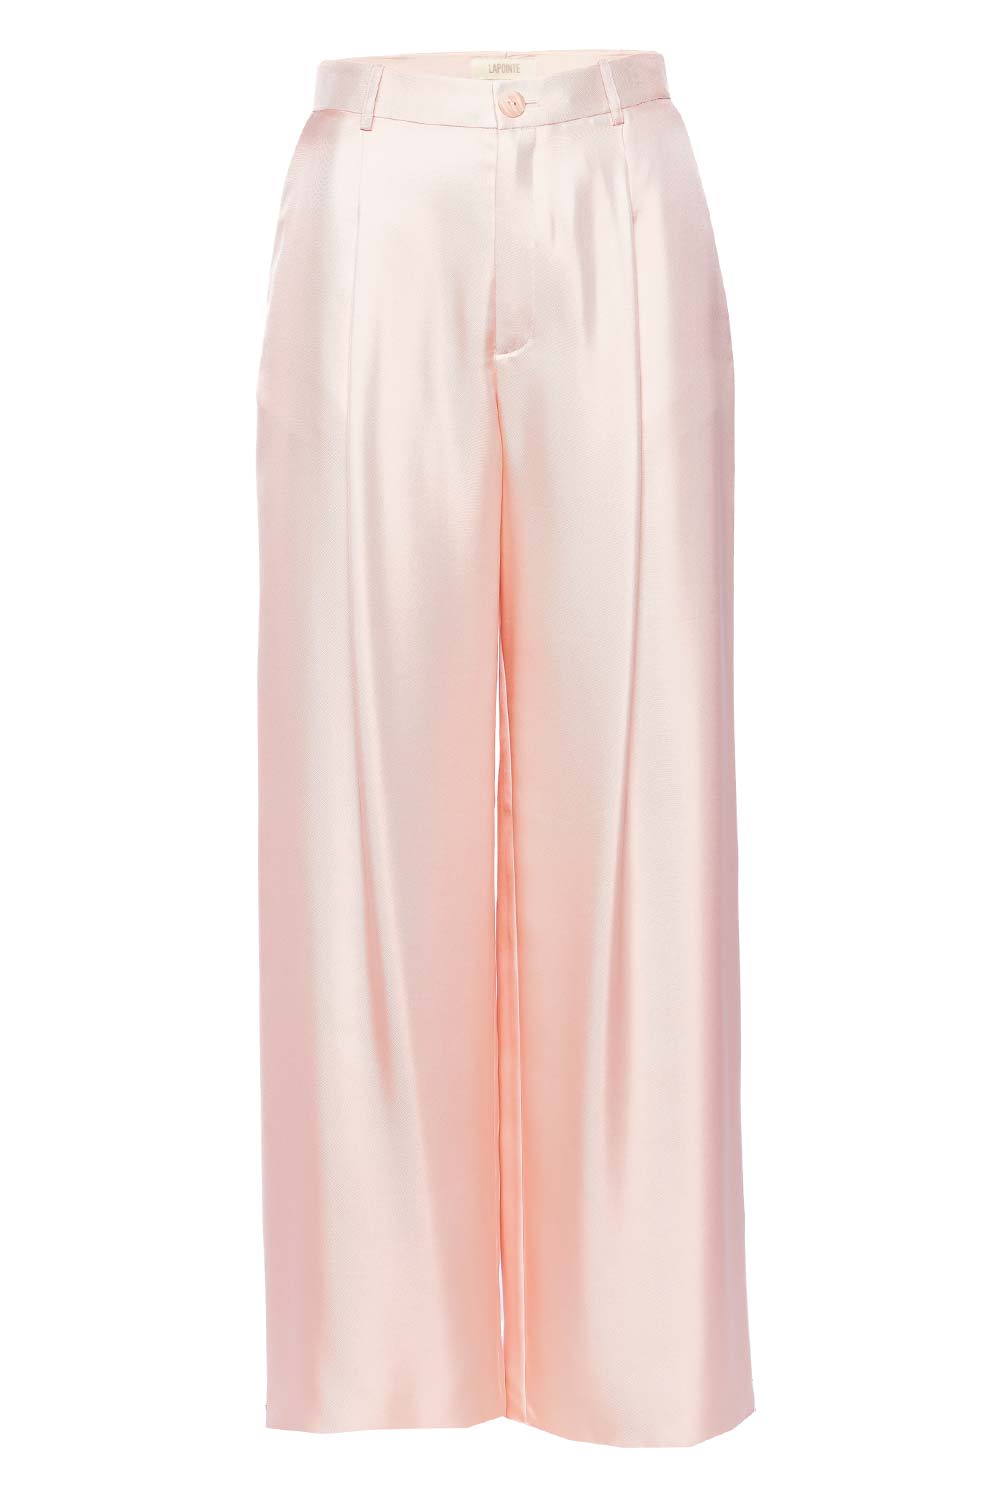 LAPOINTE Light Pink Silk Twill Pleated Pant